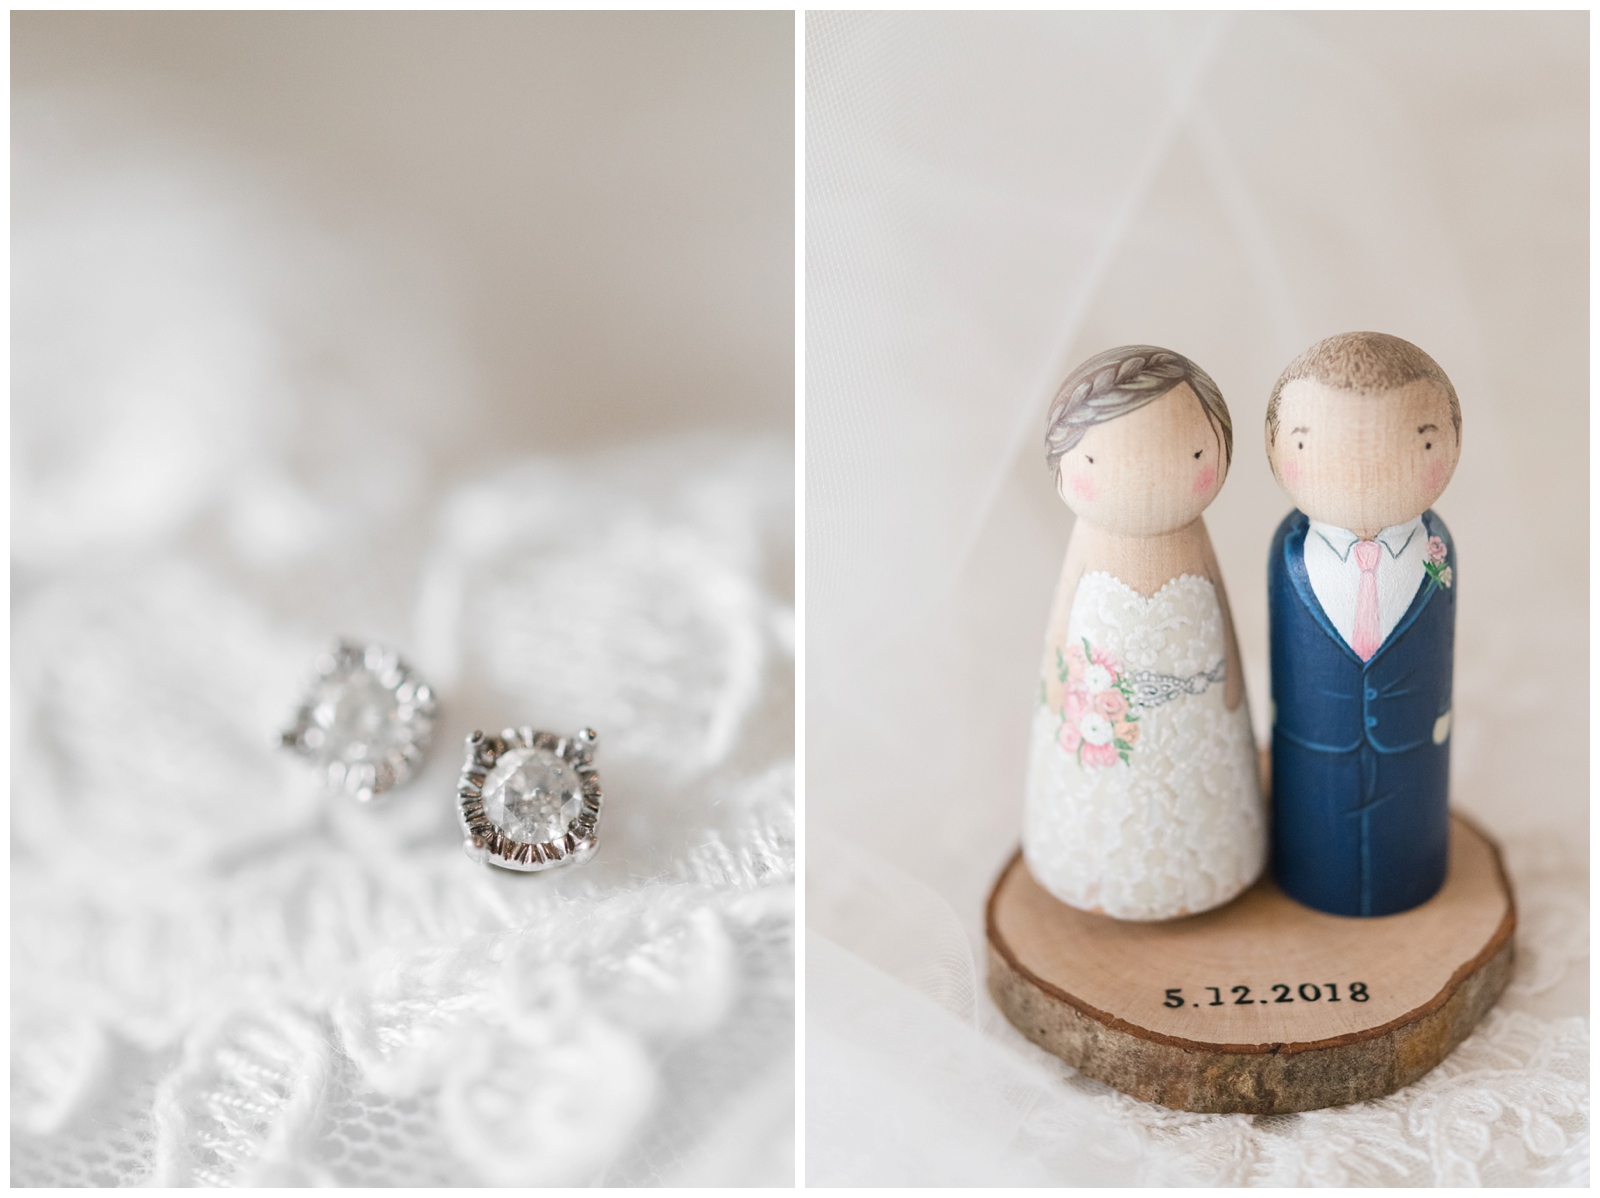 diamond earrings for the bride and wooden figurines for top of wedding cake